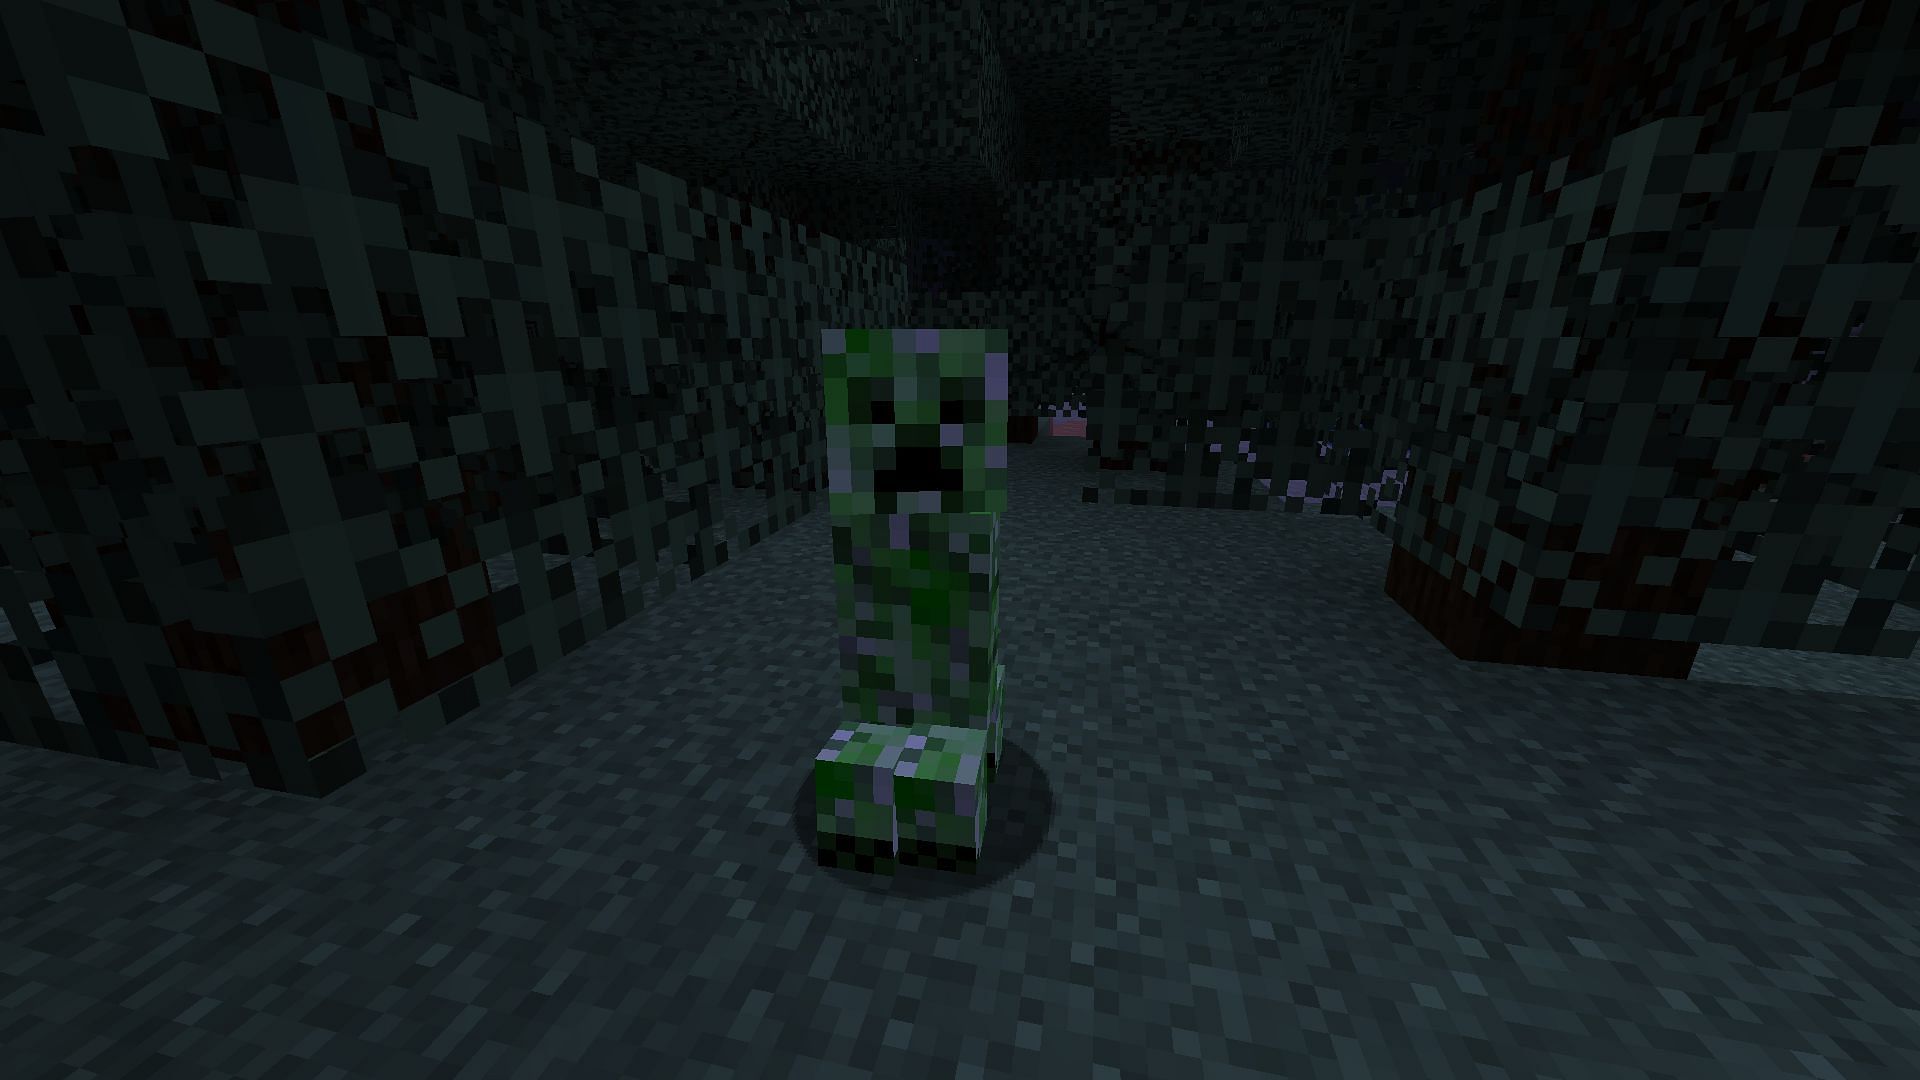 Creepers in Minecraft 1.19 update must be avoided since they can explode (Image via Mojang)